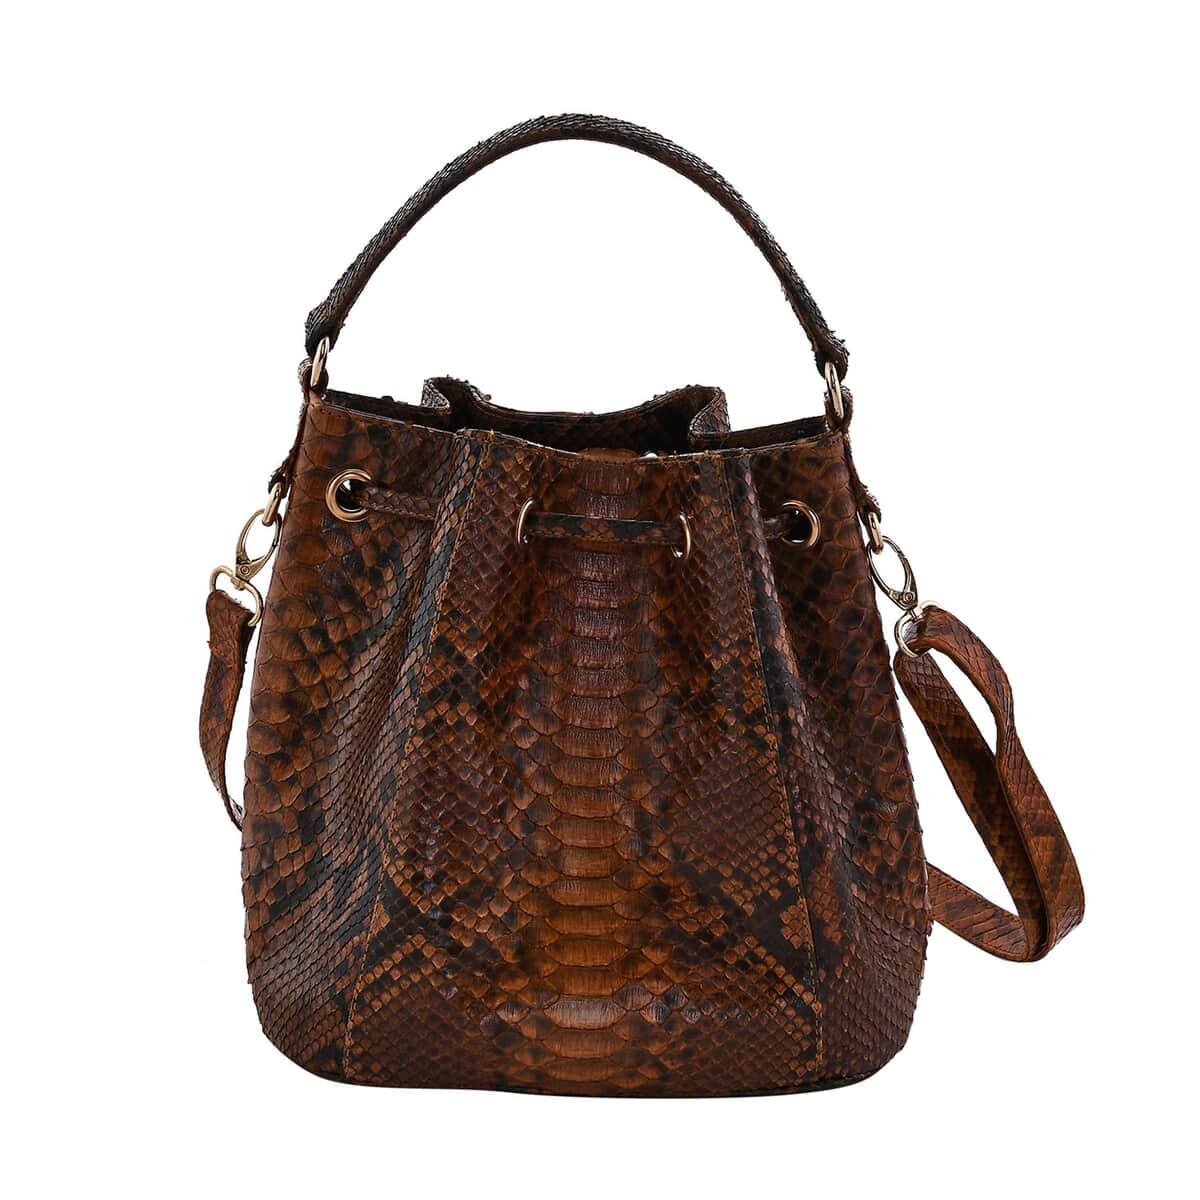 Doorbuster The Grand Pelle Handcrafted Brown Color Genuine Python Leather Tote Bag (15"x4.75"x10") image number 4